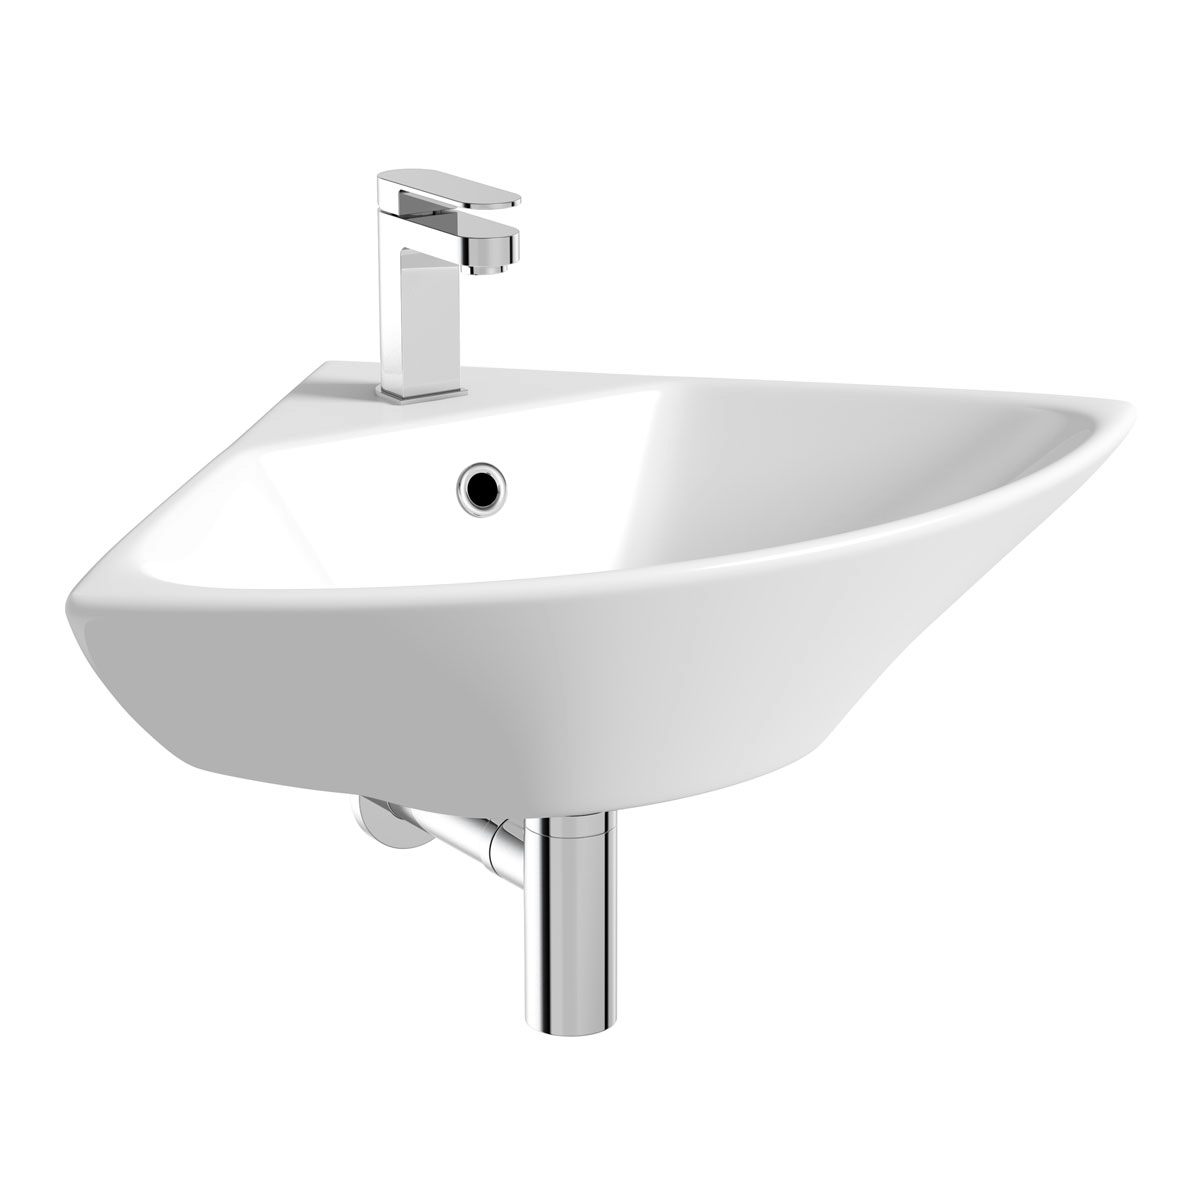 Orchard Derwent corner 1 tap hole cloakroom wall mounted basin 450mm